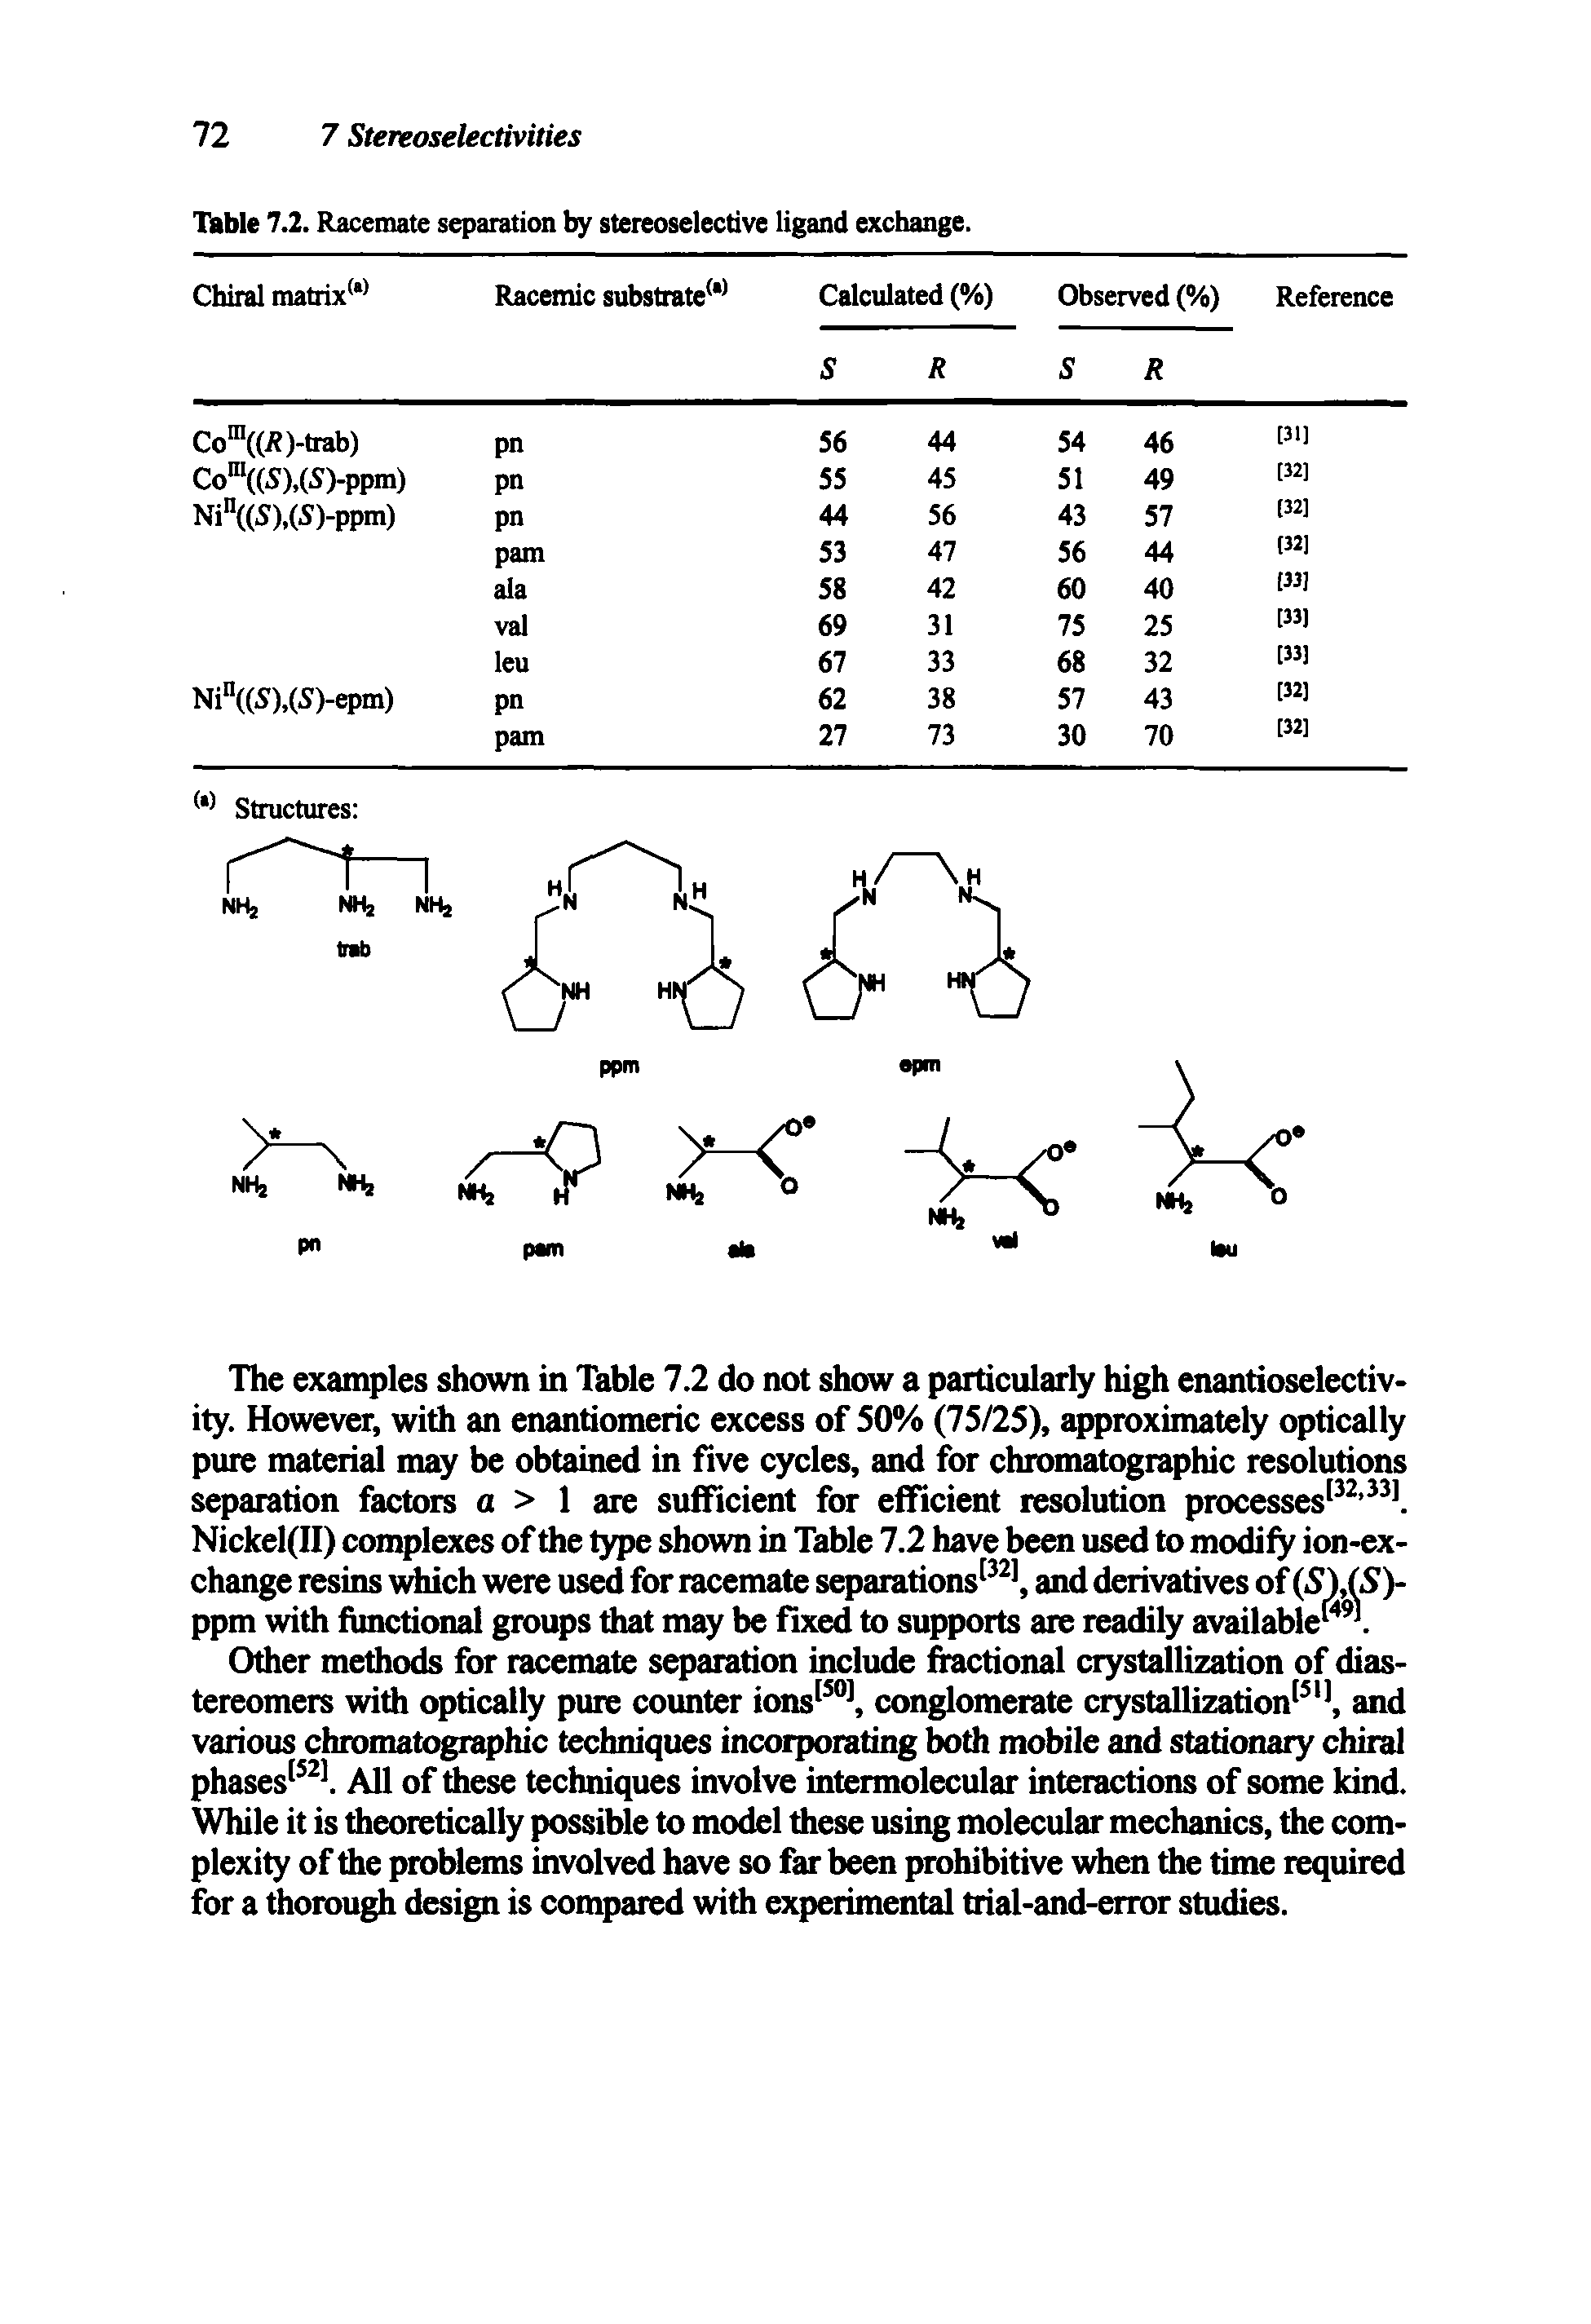 Table 7.2. Racemate separation by stereoselective ligand exchange.